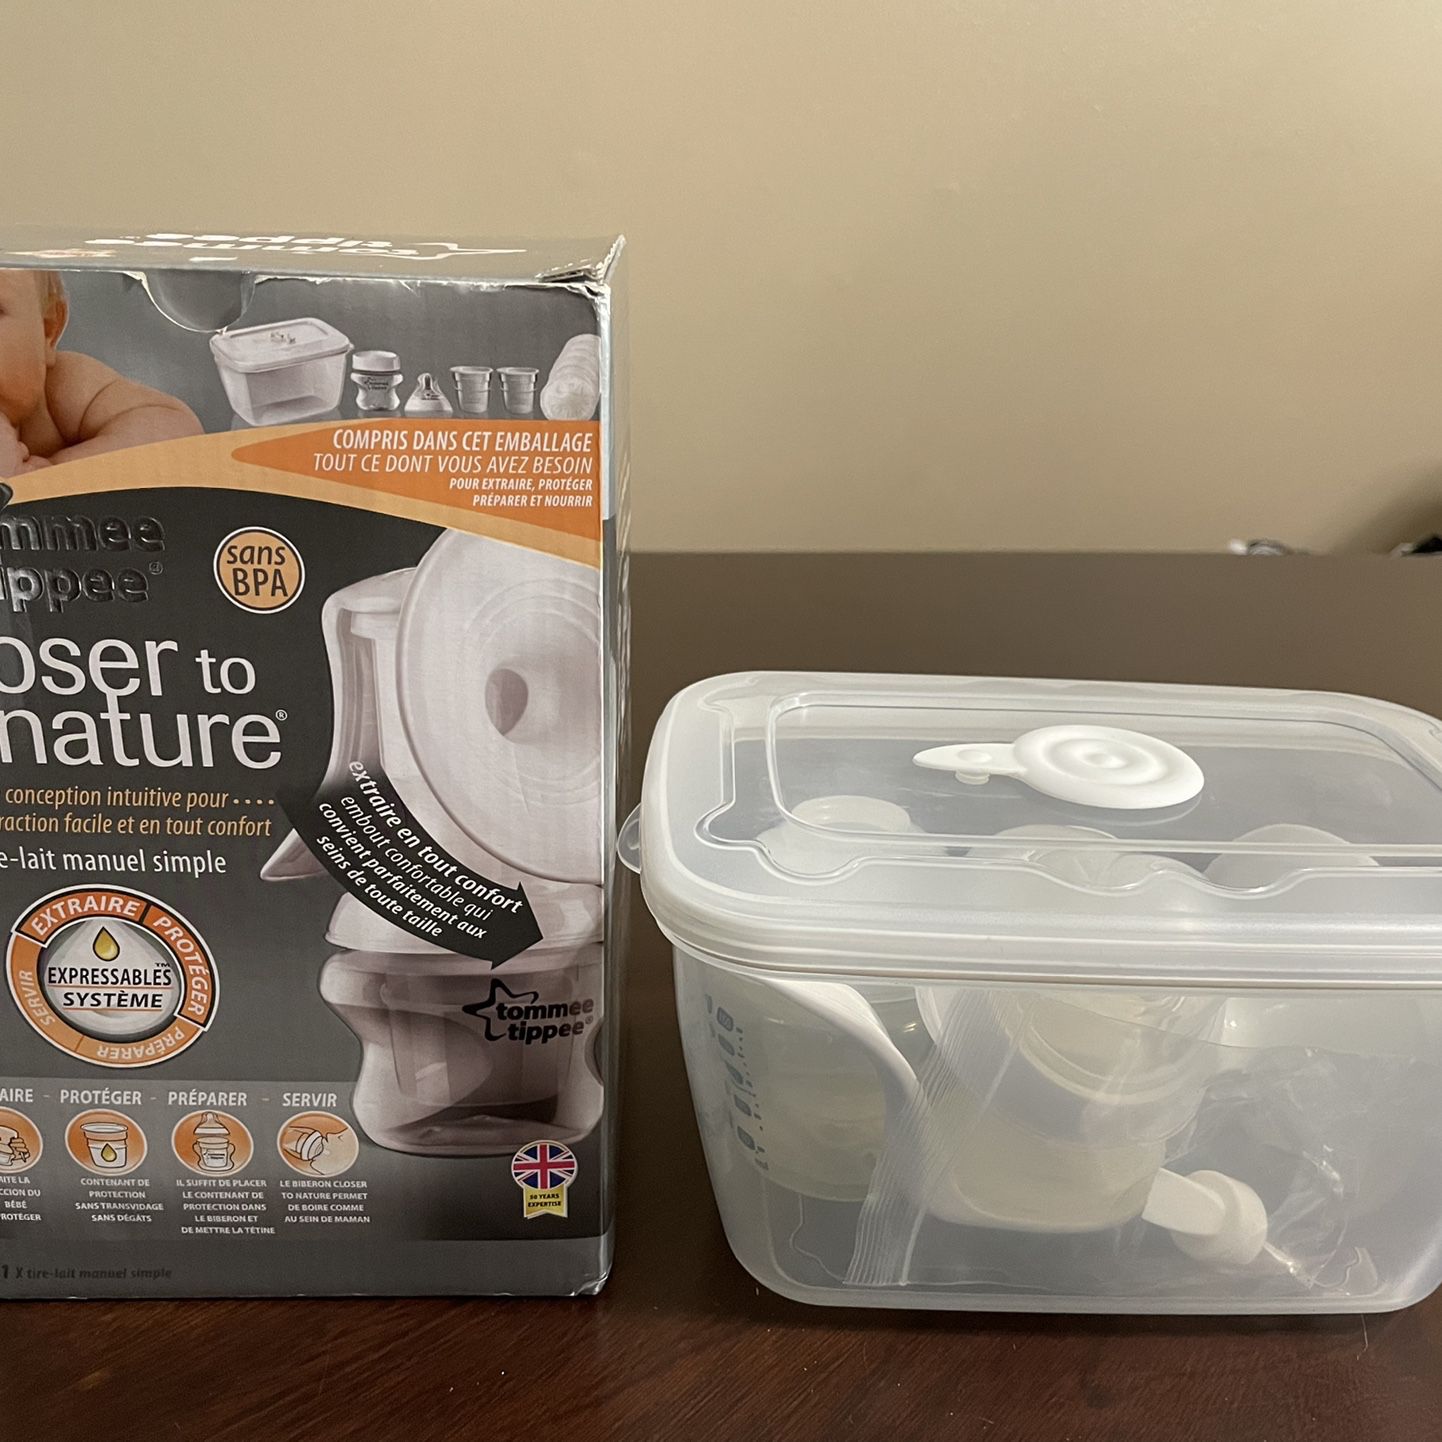 Tommee Tippee Closer to Nature Single Breast Pump for Sale in San Antonio, TX OfferUp